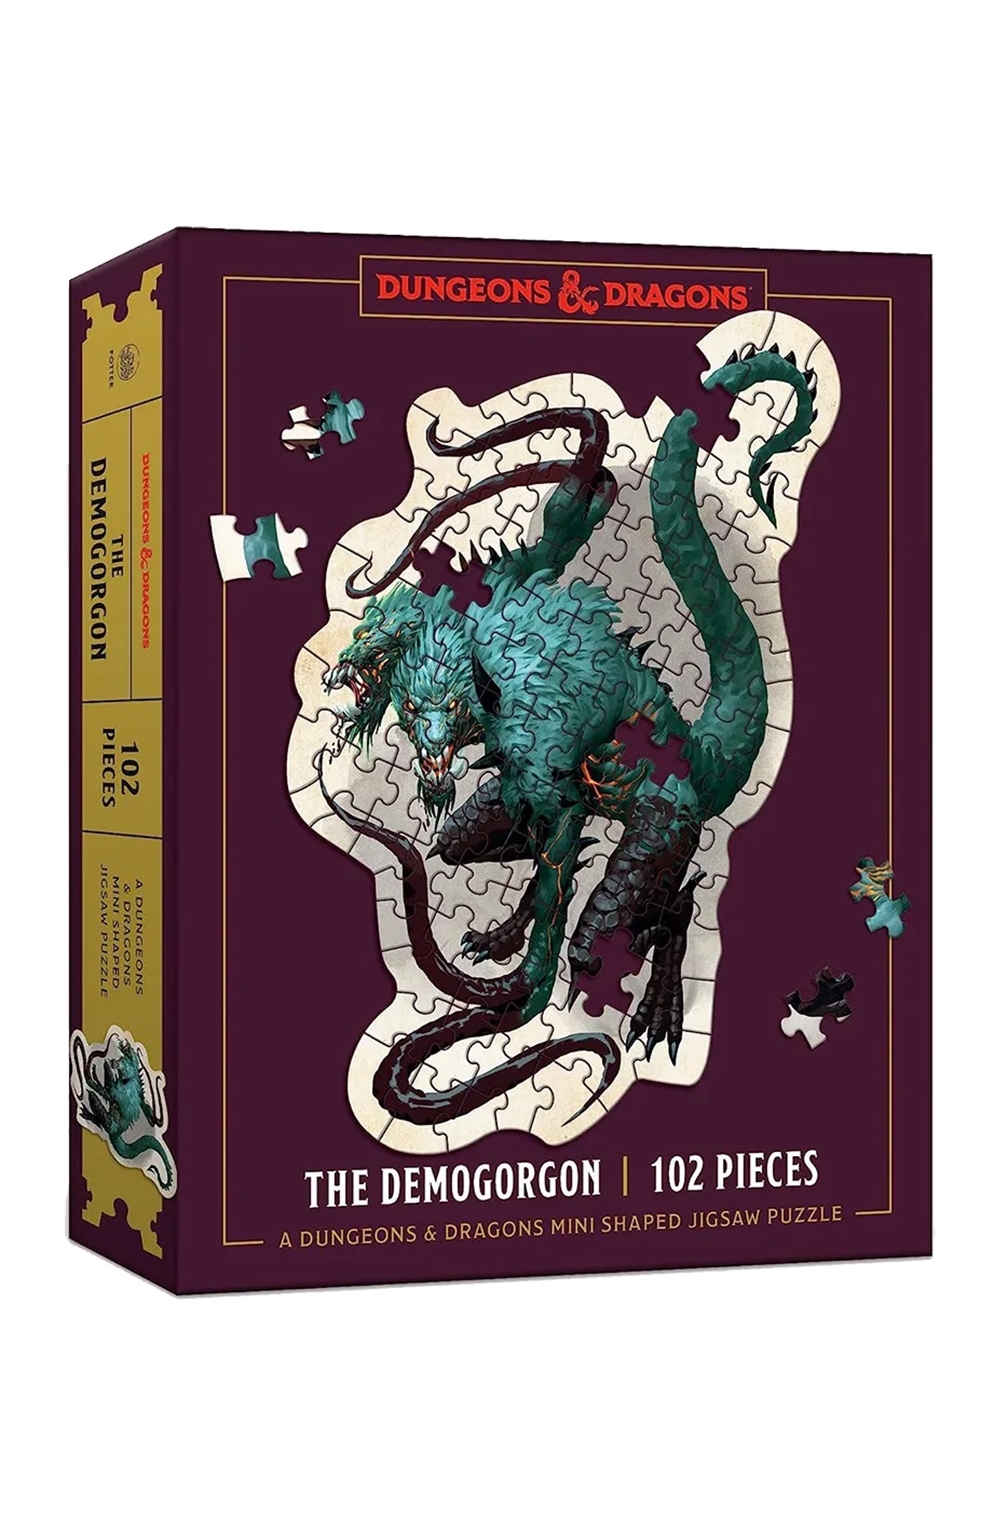 Dungeons & Dragons: Mini Shaped Jigsaw Puzzle: The Demogorgon Edition